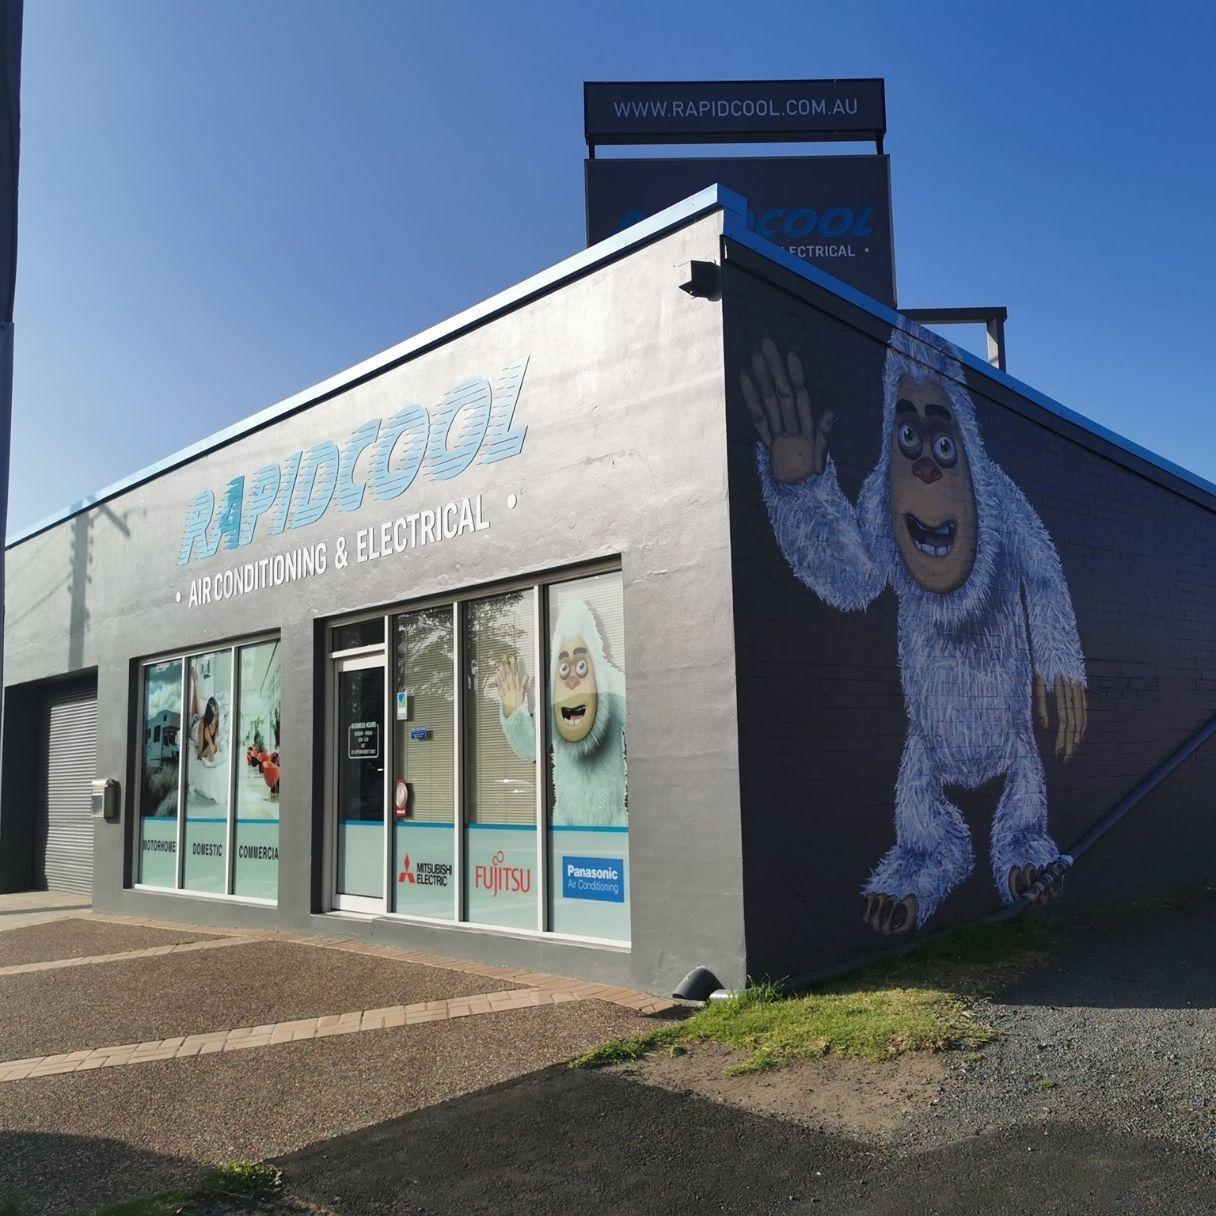 Rapidcool Air Conditioning & Electrical Workshop — Rapidcool Air Conditioning & Electrical in Illawarra, NSW